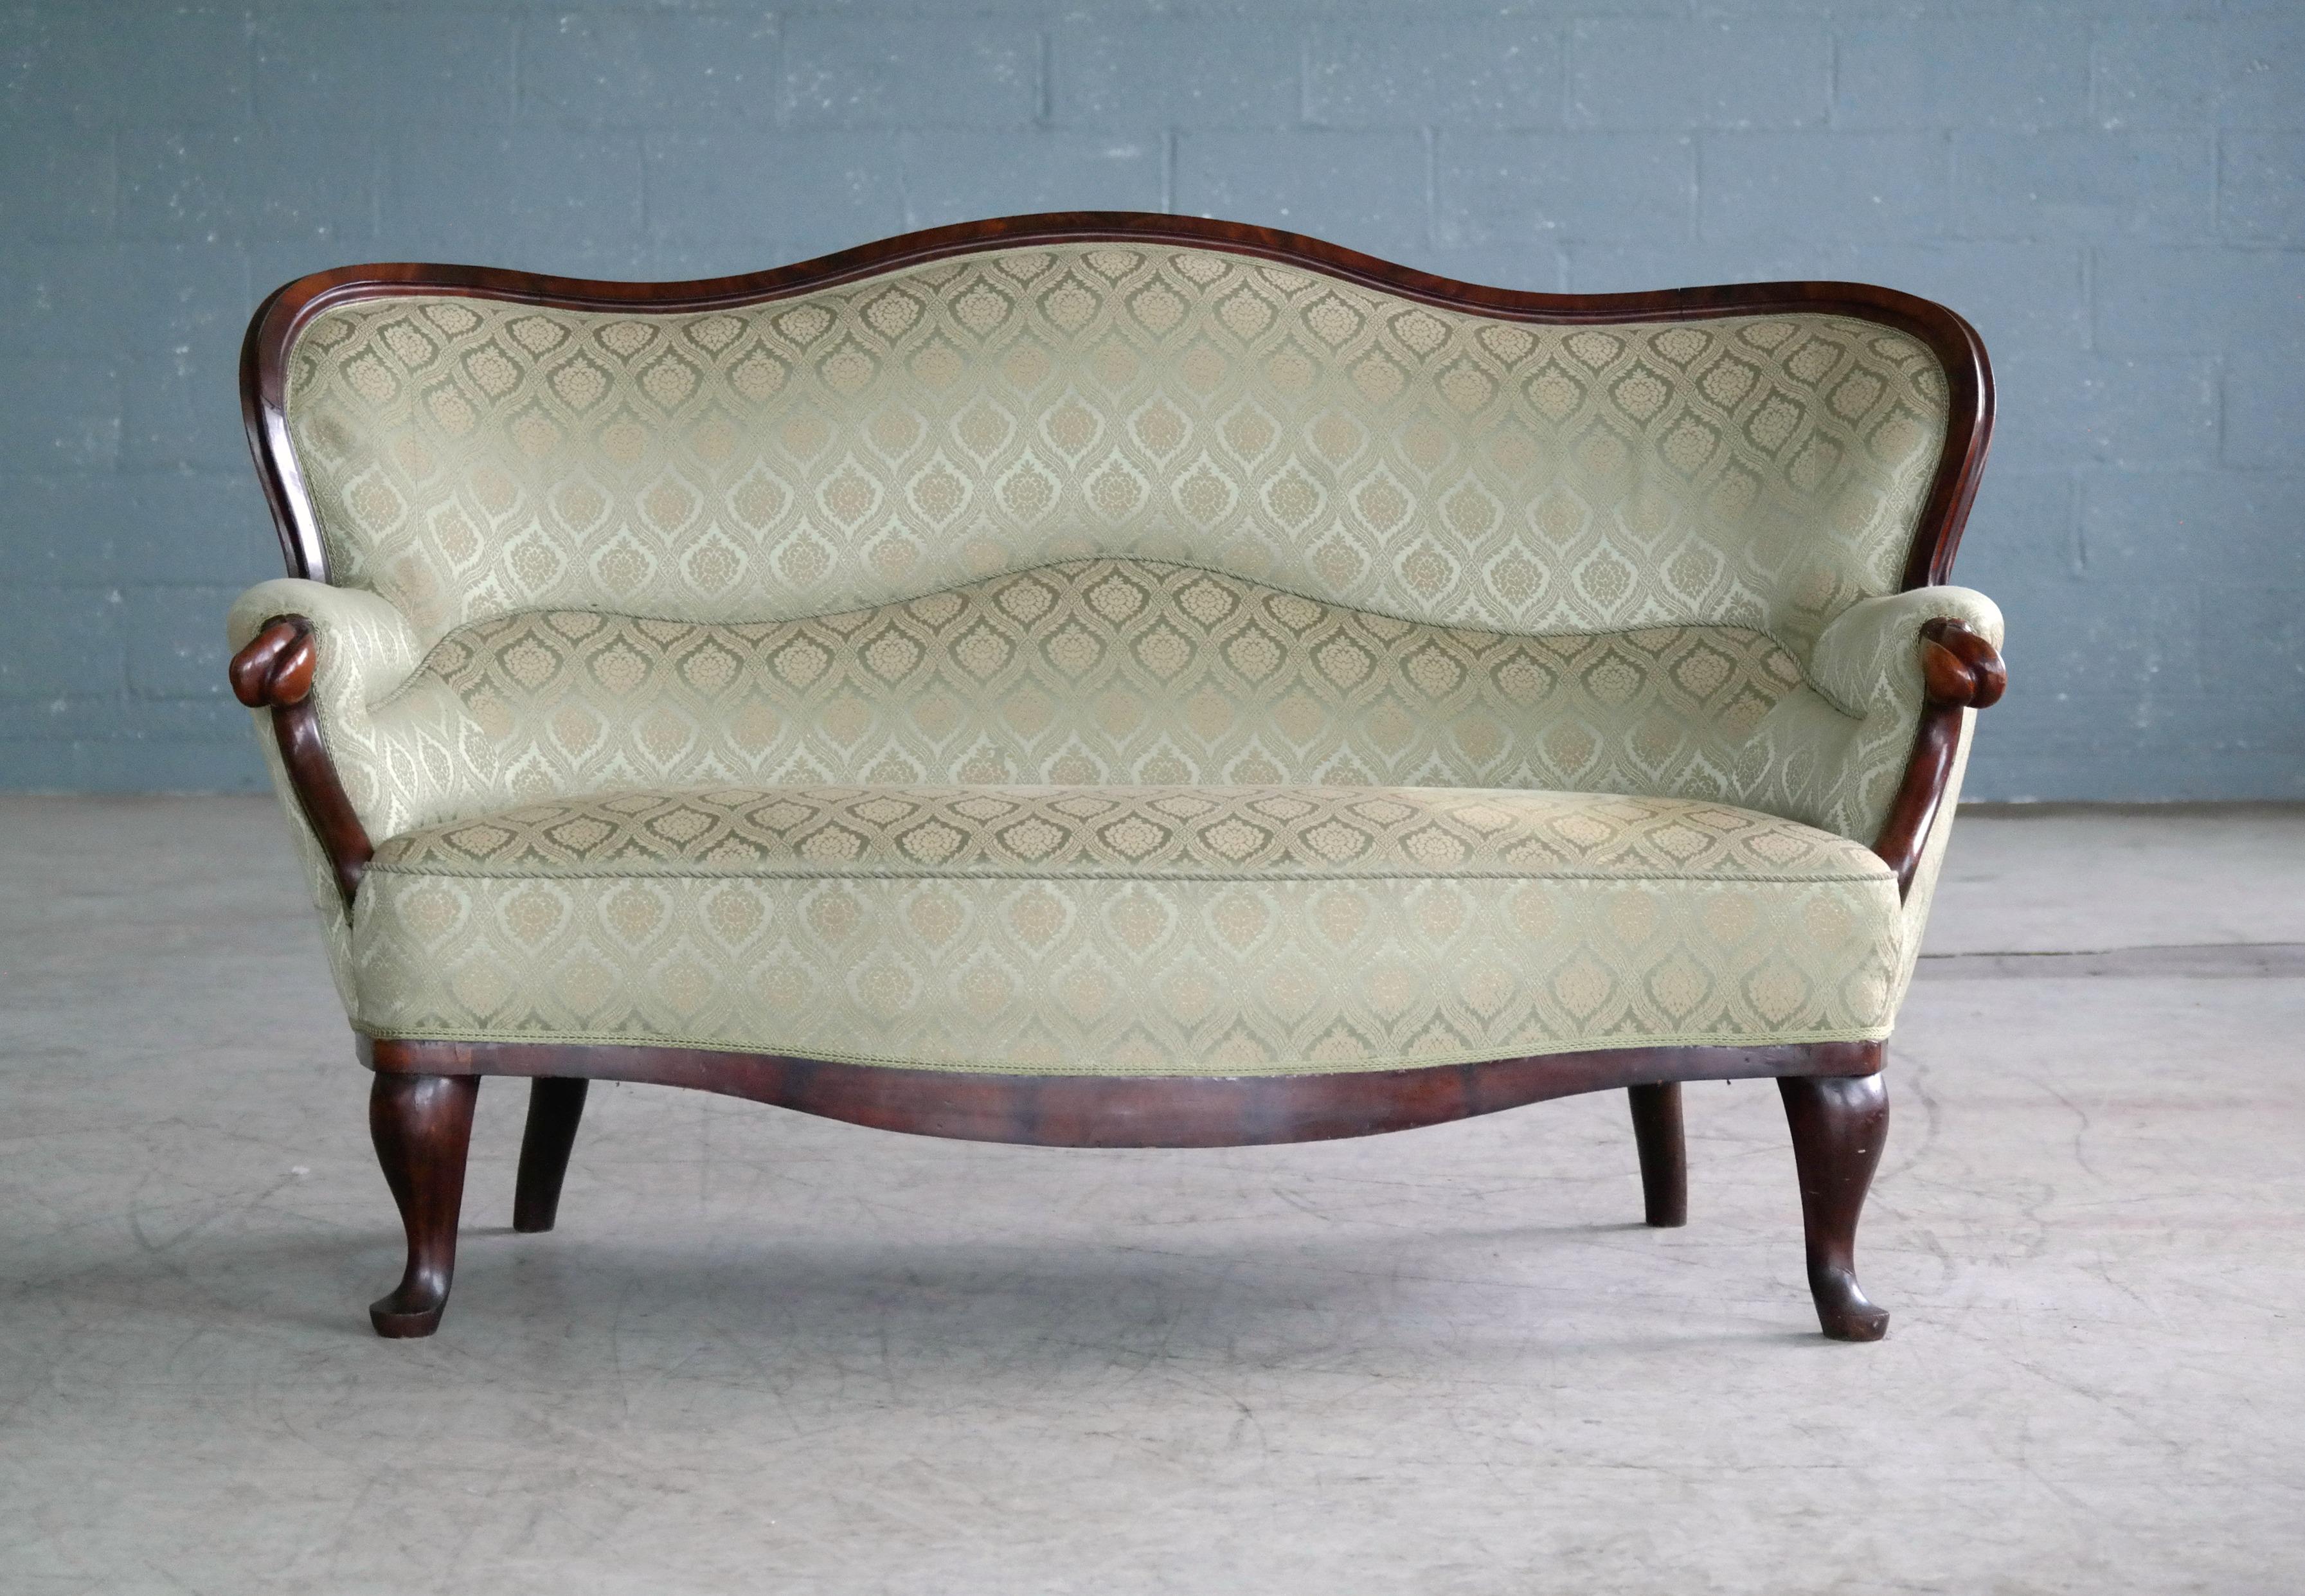 Elegant Rococo Revival style settee made from carved mahogany and made in Denmark around the 1860s. Sturdy and comfortable with only minor nicks and dents to the wooden frame and legs. The fabric is showing some soiling and the piece needs to get